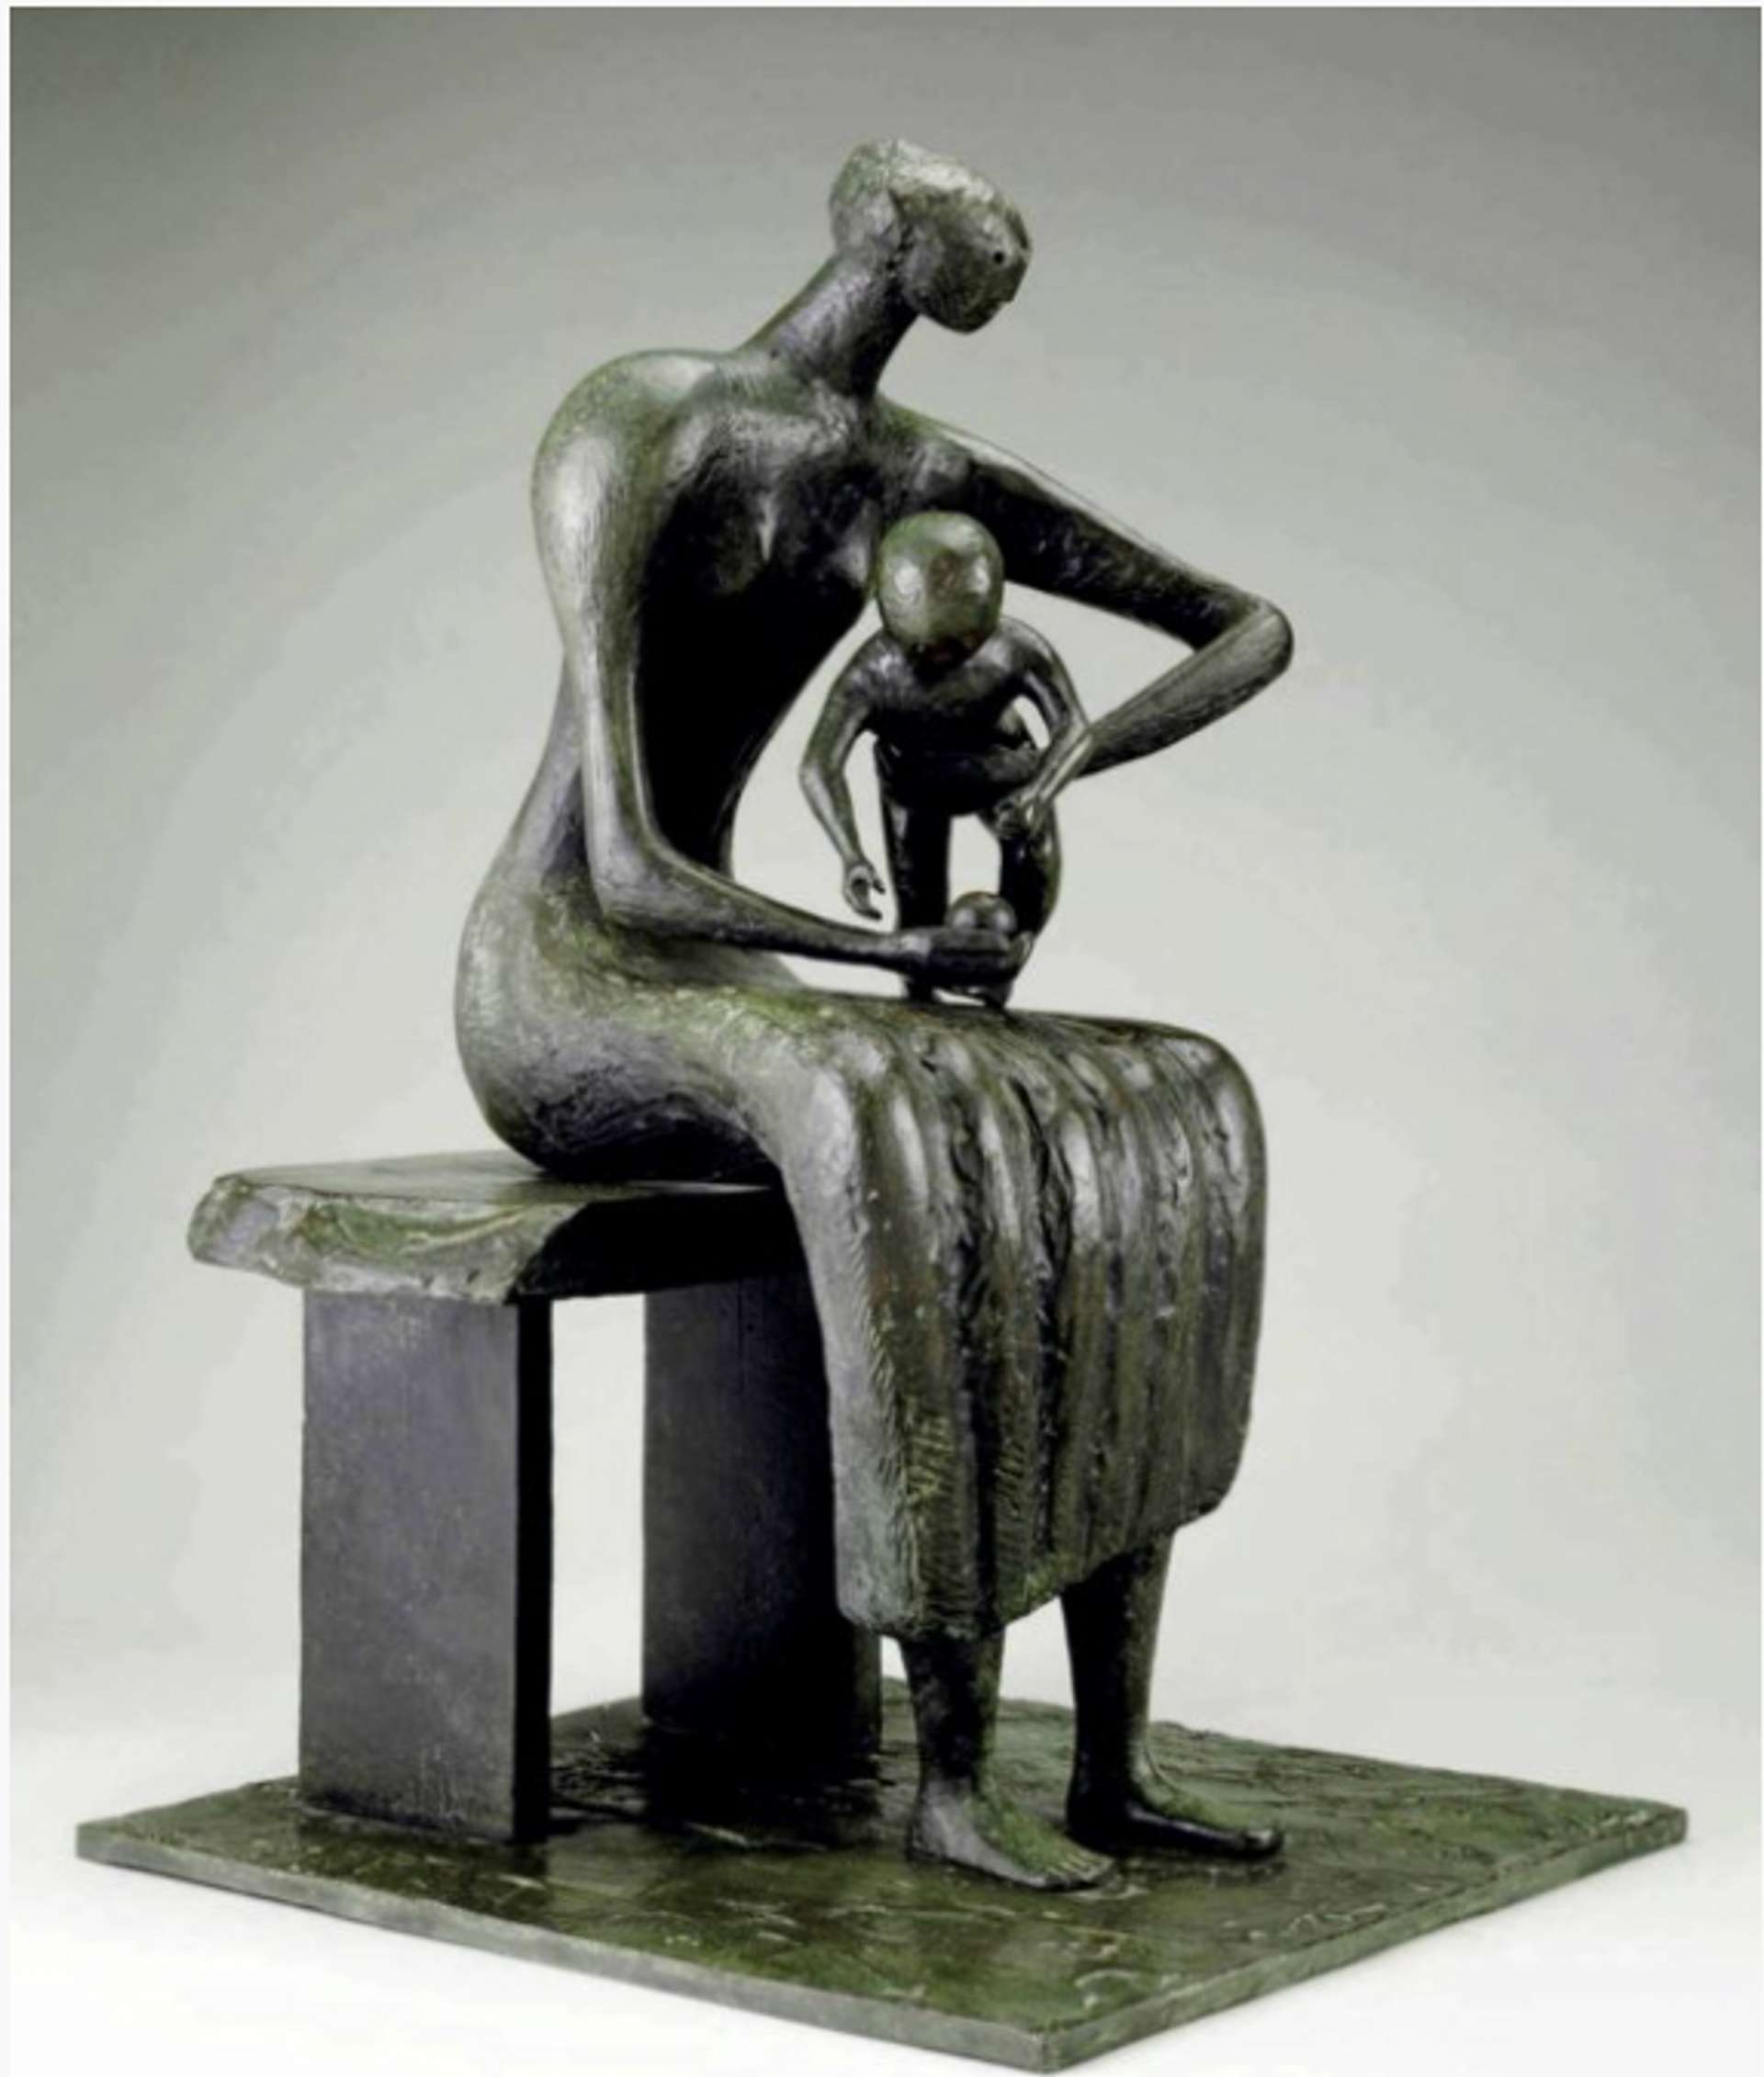 A bronze sculpture by Henry Moore depicting a seated woman cradling a standing baby on her lap. The woman supports the baby's torso with one arm while holding an apple in her other hand, which rests on her thigh and attracts the child's gaze. The sculpture showcases the woman seated on a bench and is presented on a thin square plinth.